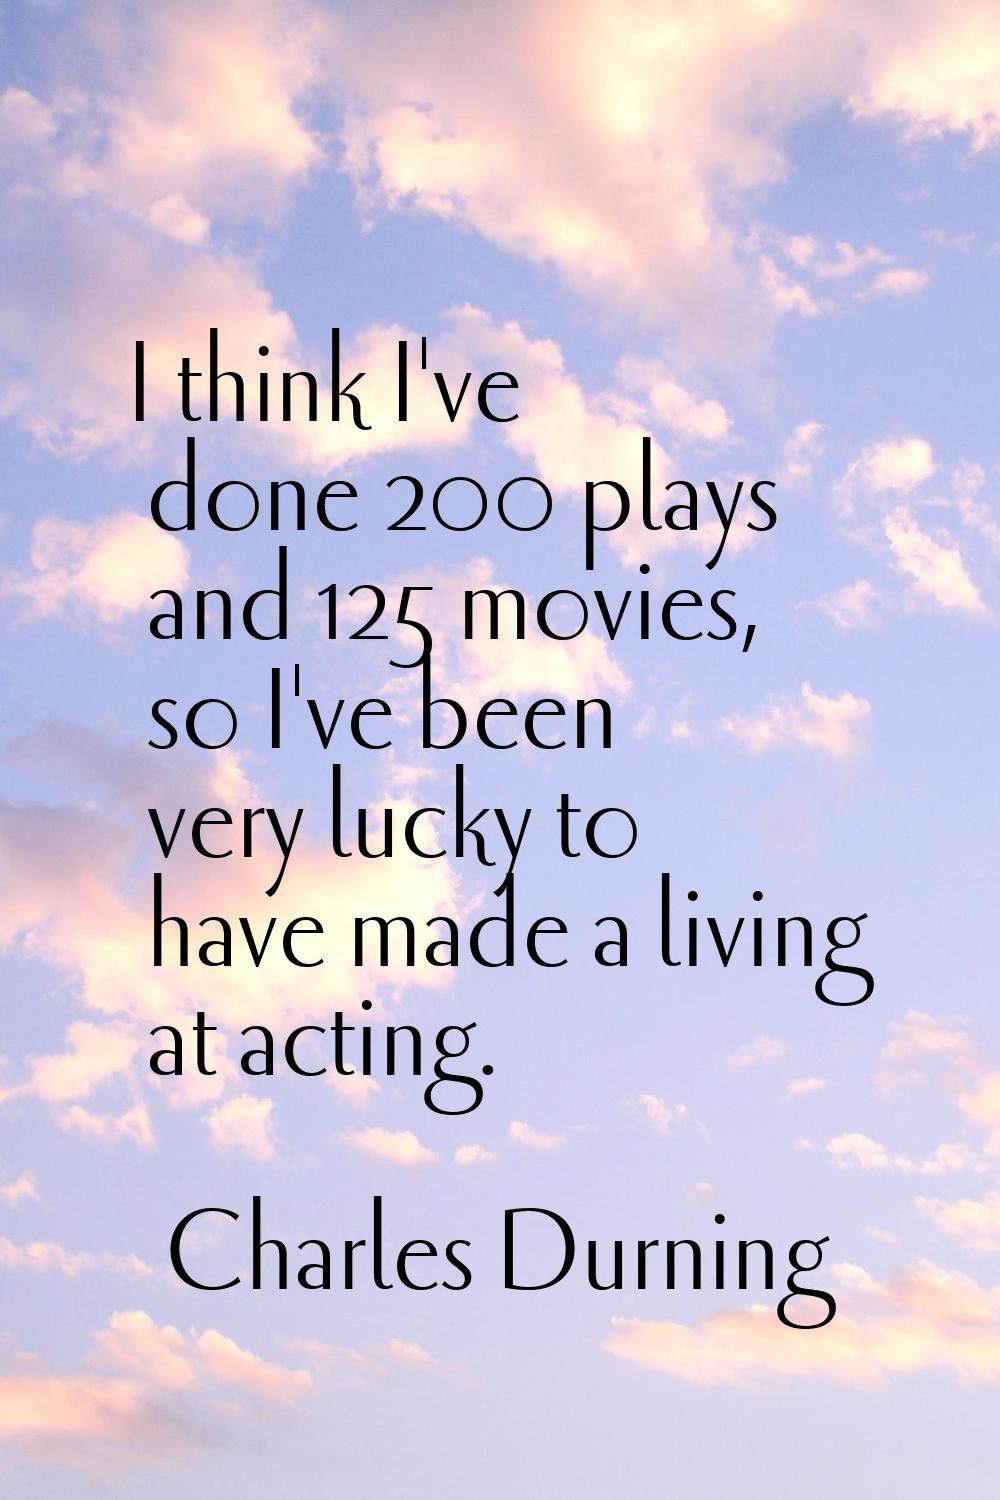 I think I've done 200 plays and 125 movies, so I've been very lucky to have made a living at acting